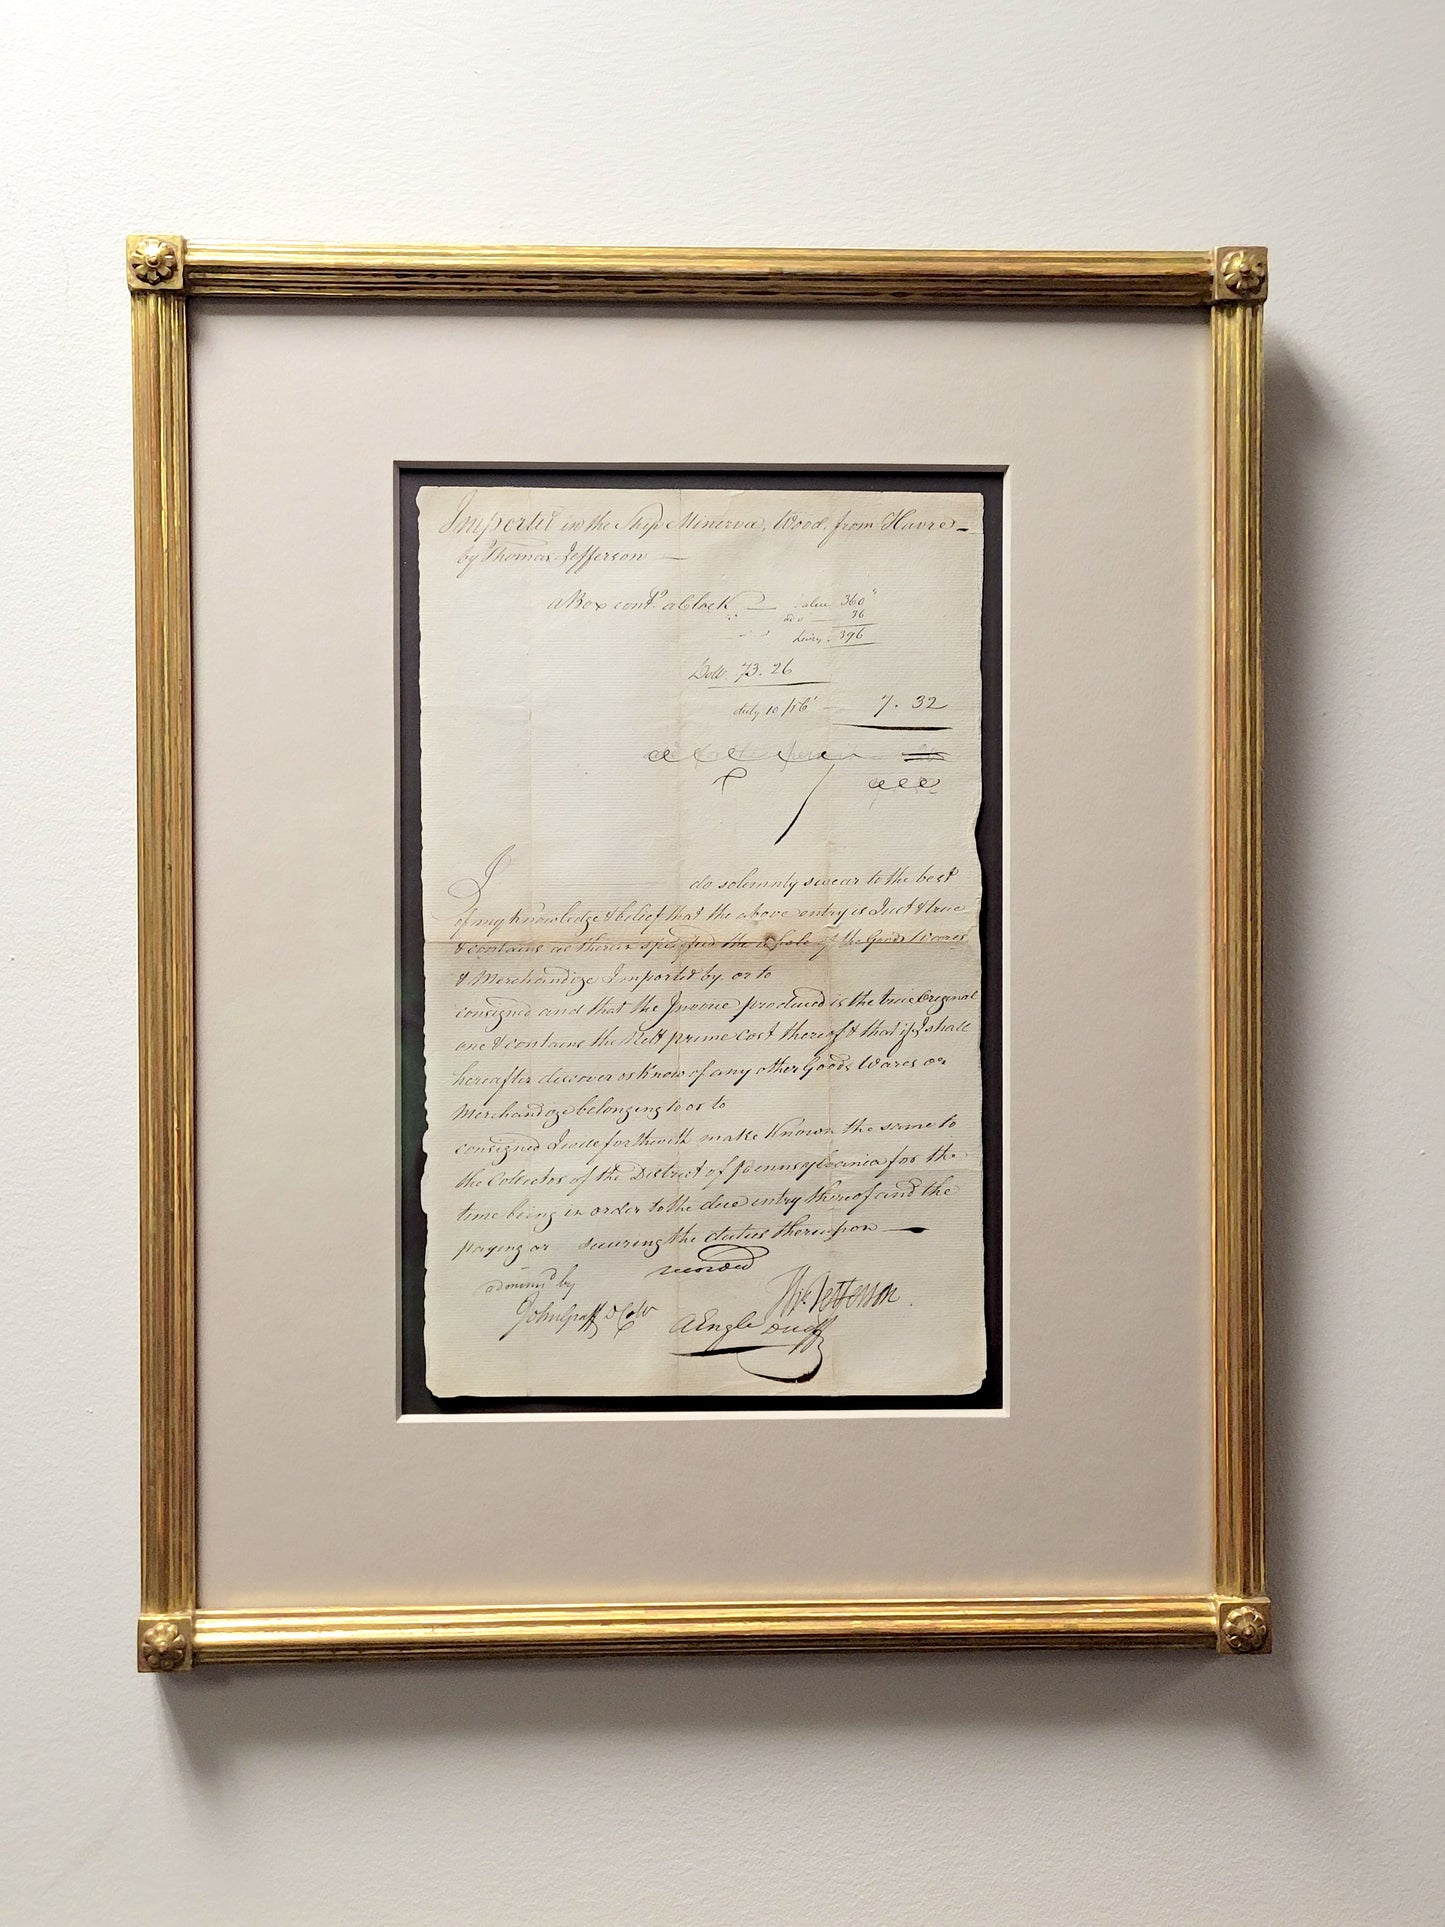 Document signed by Thomas Jefferson for the import duty on his famous Louis Chantrot Obelisk Clock